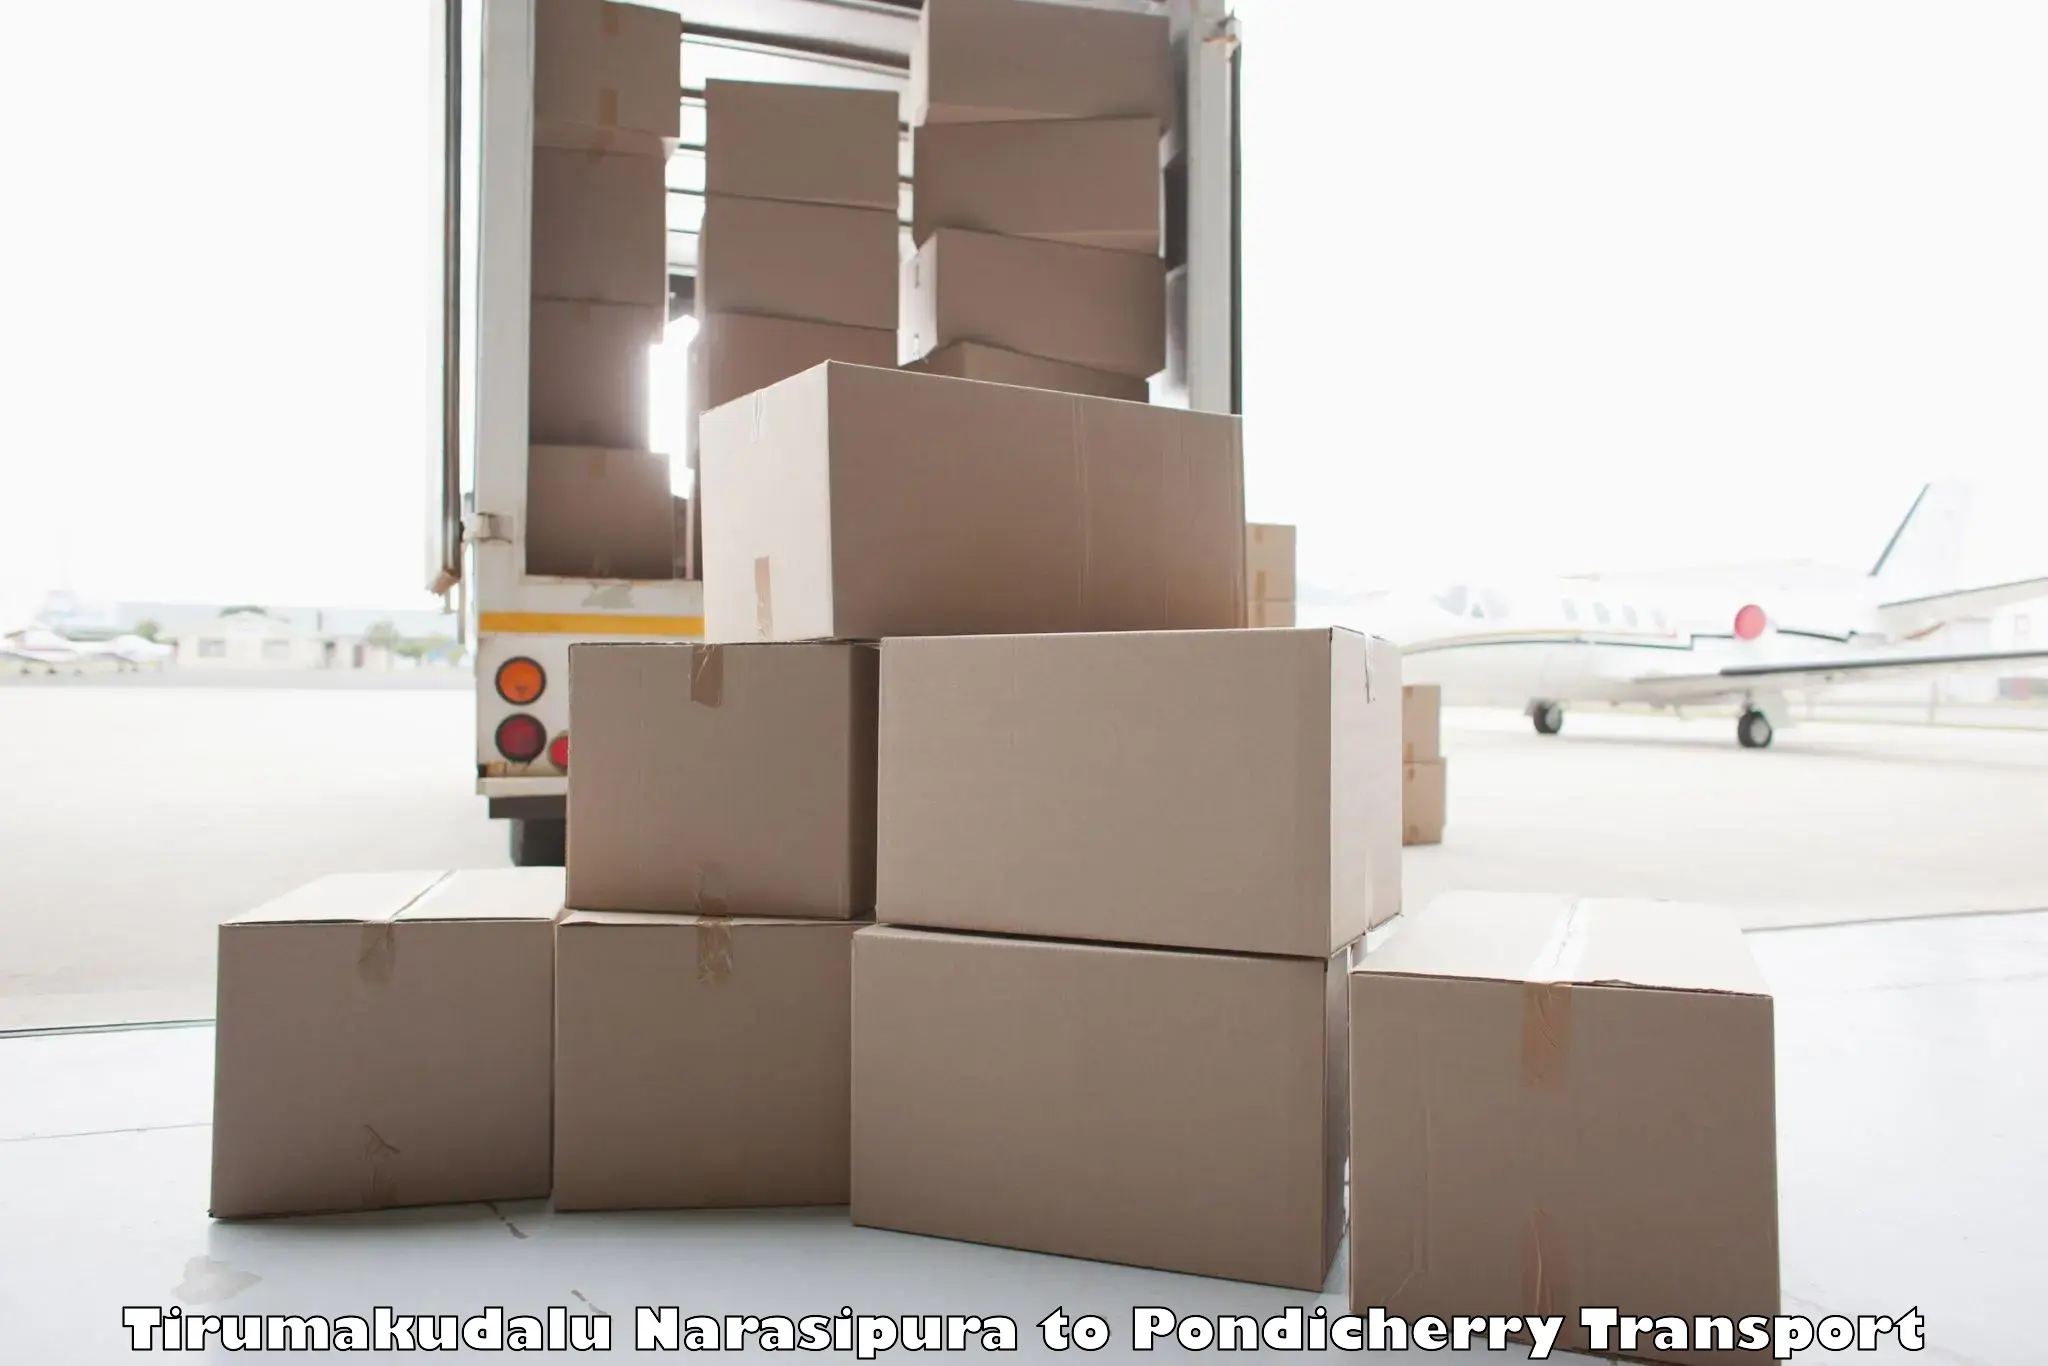 Package delivery services in Tirumakudalu Narasipura to Pondicherry